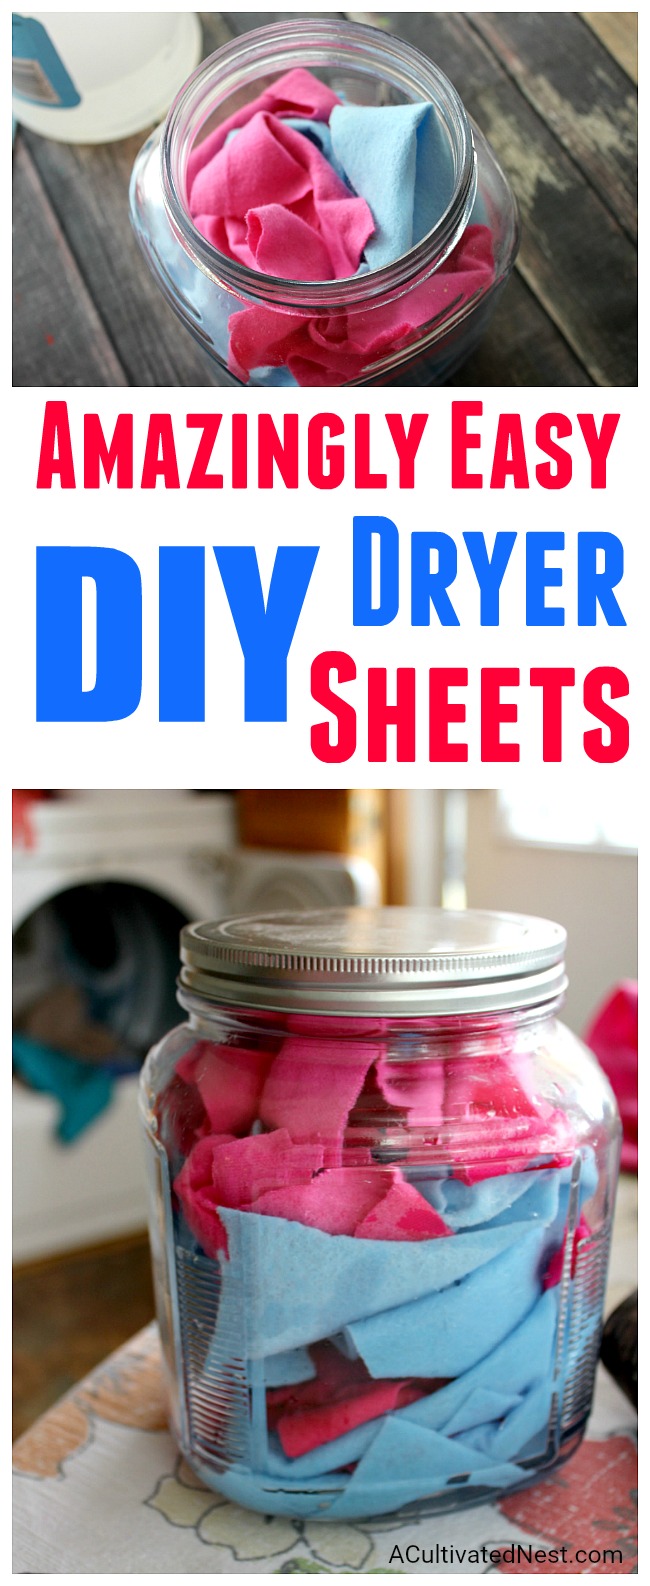 Reusable Homemade Dryer Sheets- It's amazingly easy to make these reusable homemade dryer sheets! You only need a few ingredients and a few minutes, and then you'll have all-natural DIY dryer sheets ready to use in your next load of laundry! | homemade laundry products, ways to save money, money saving tips, money saving ideas, #diy #laundry #frugalLiving #homemade